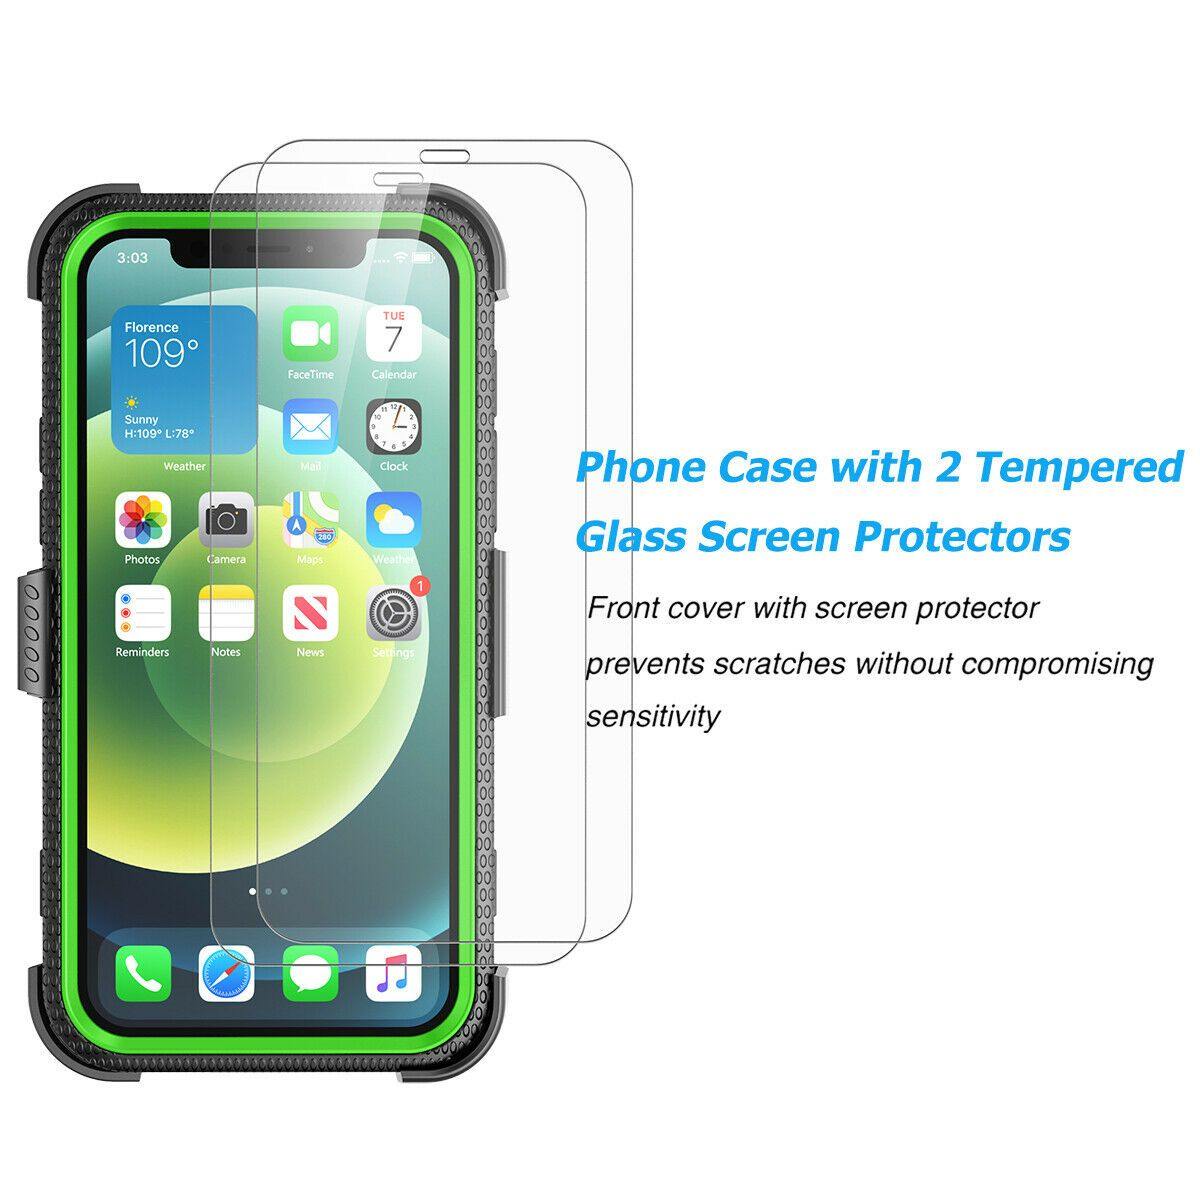 Case with Belt Clip Holster Stand for iPhone 12 Pro/Max - carolay.co